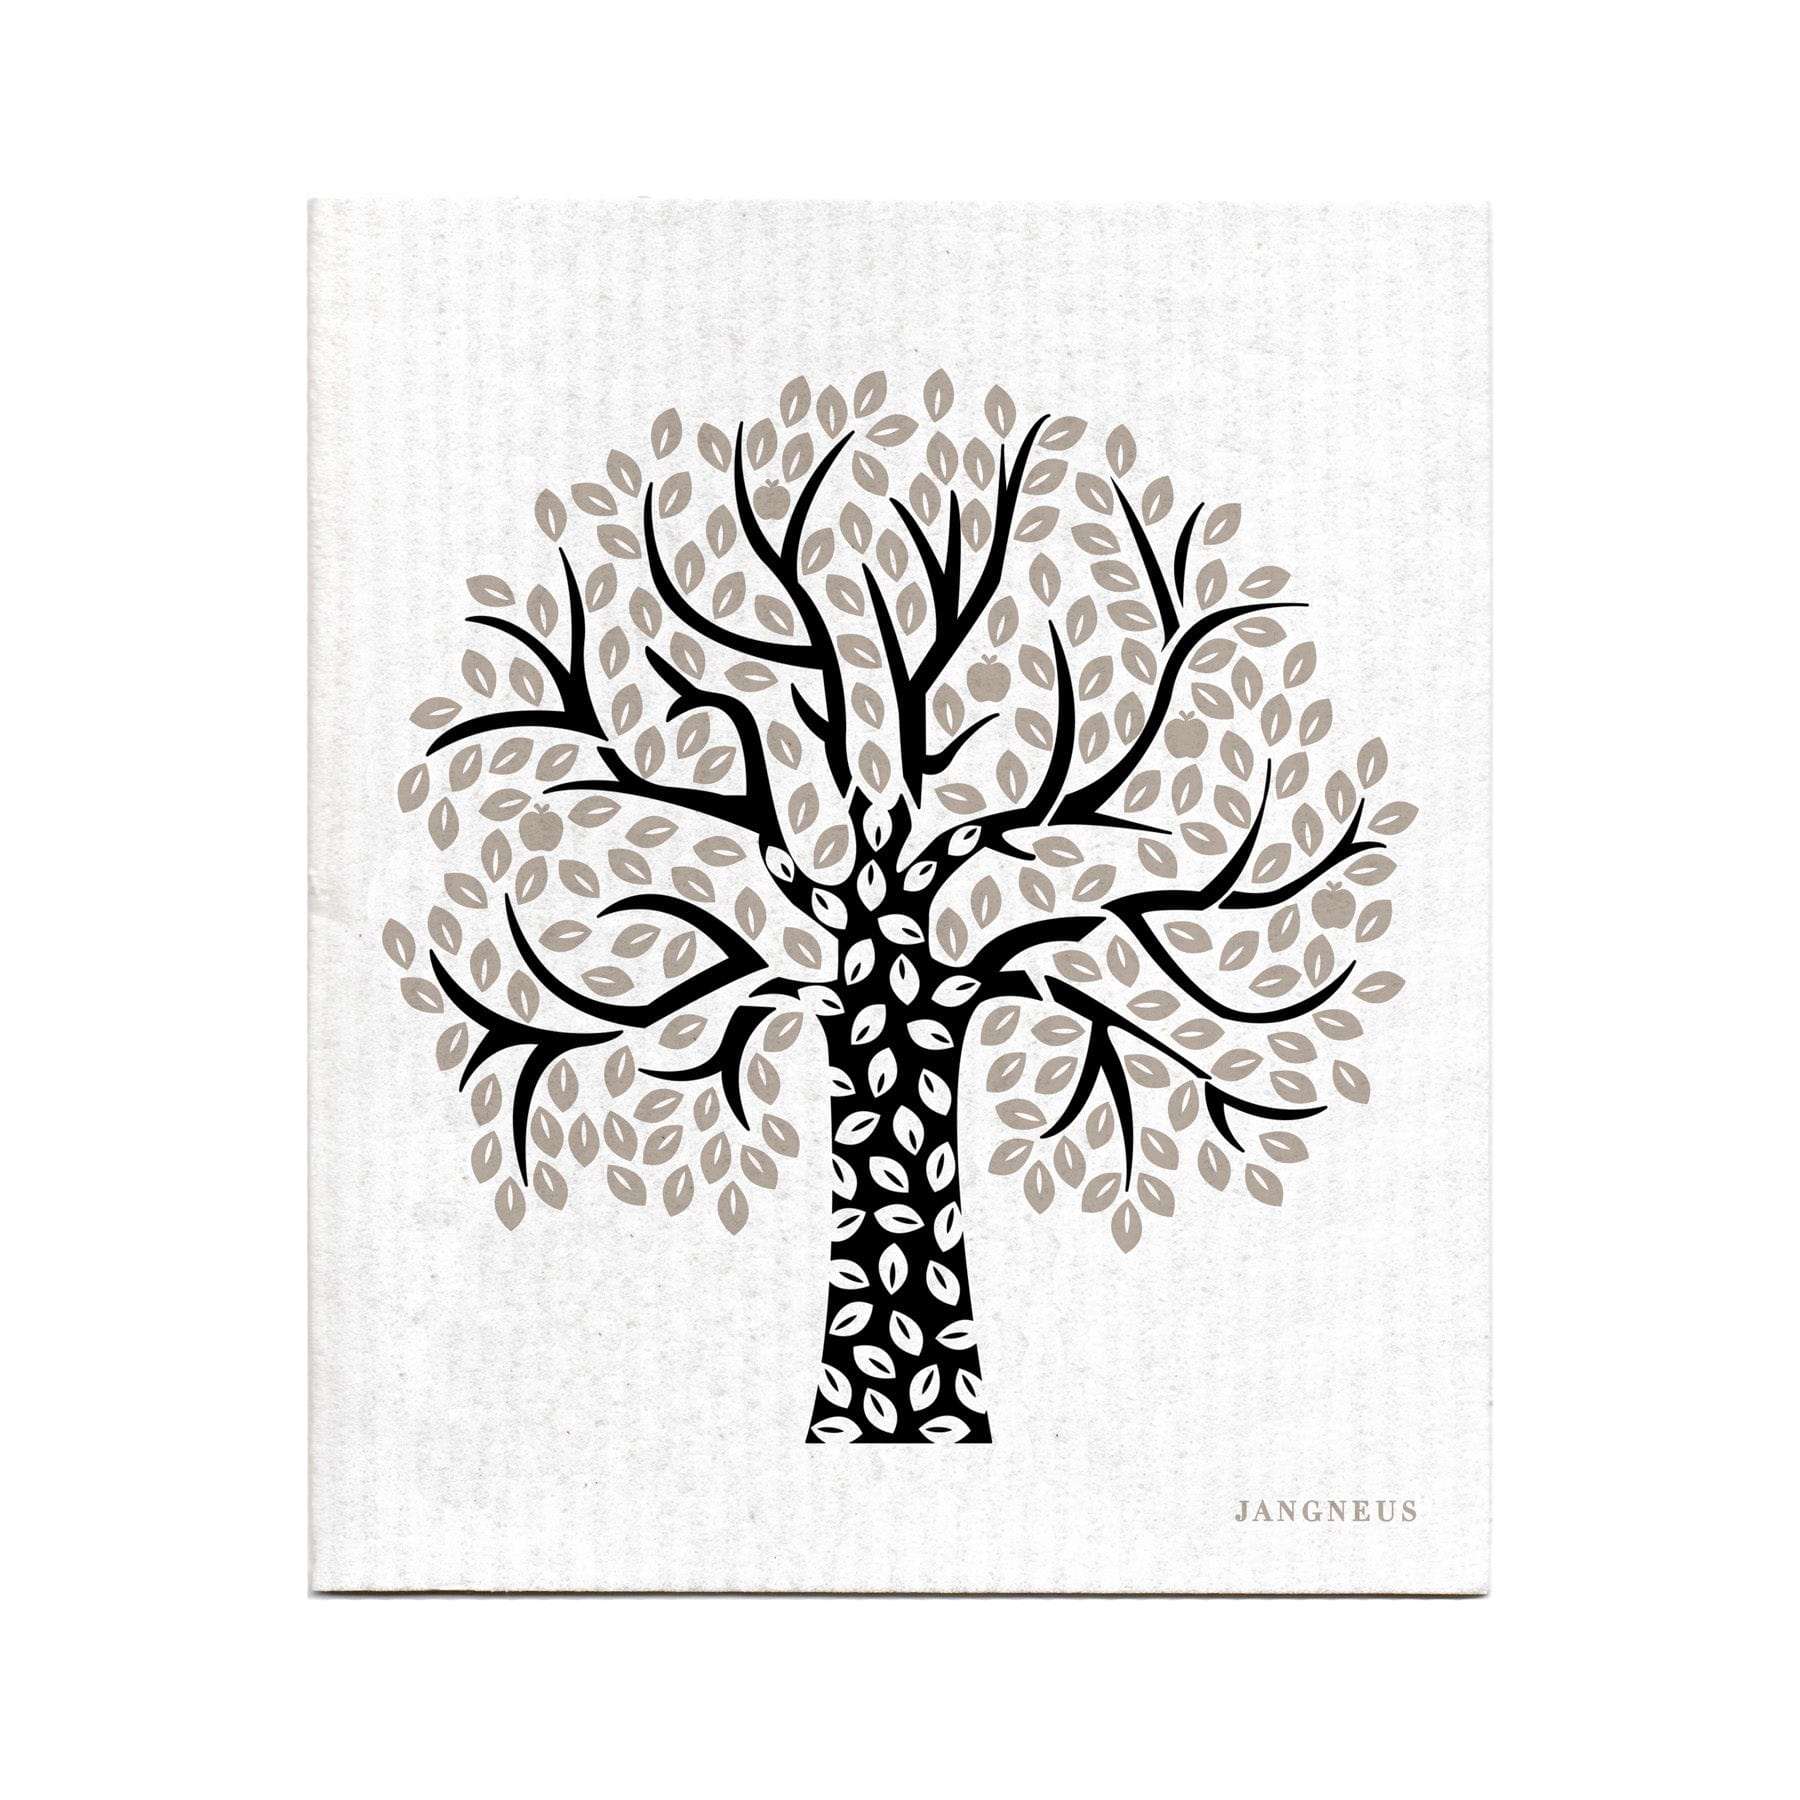 Stylized illustration of a tree with black trunk and brown leaves on textured background, modern decor art by Jangneus